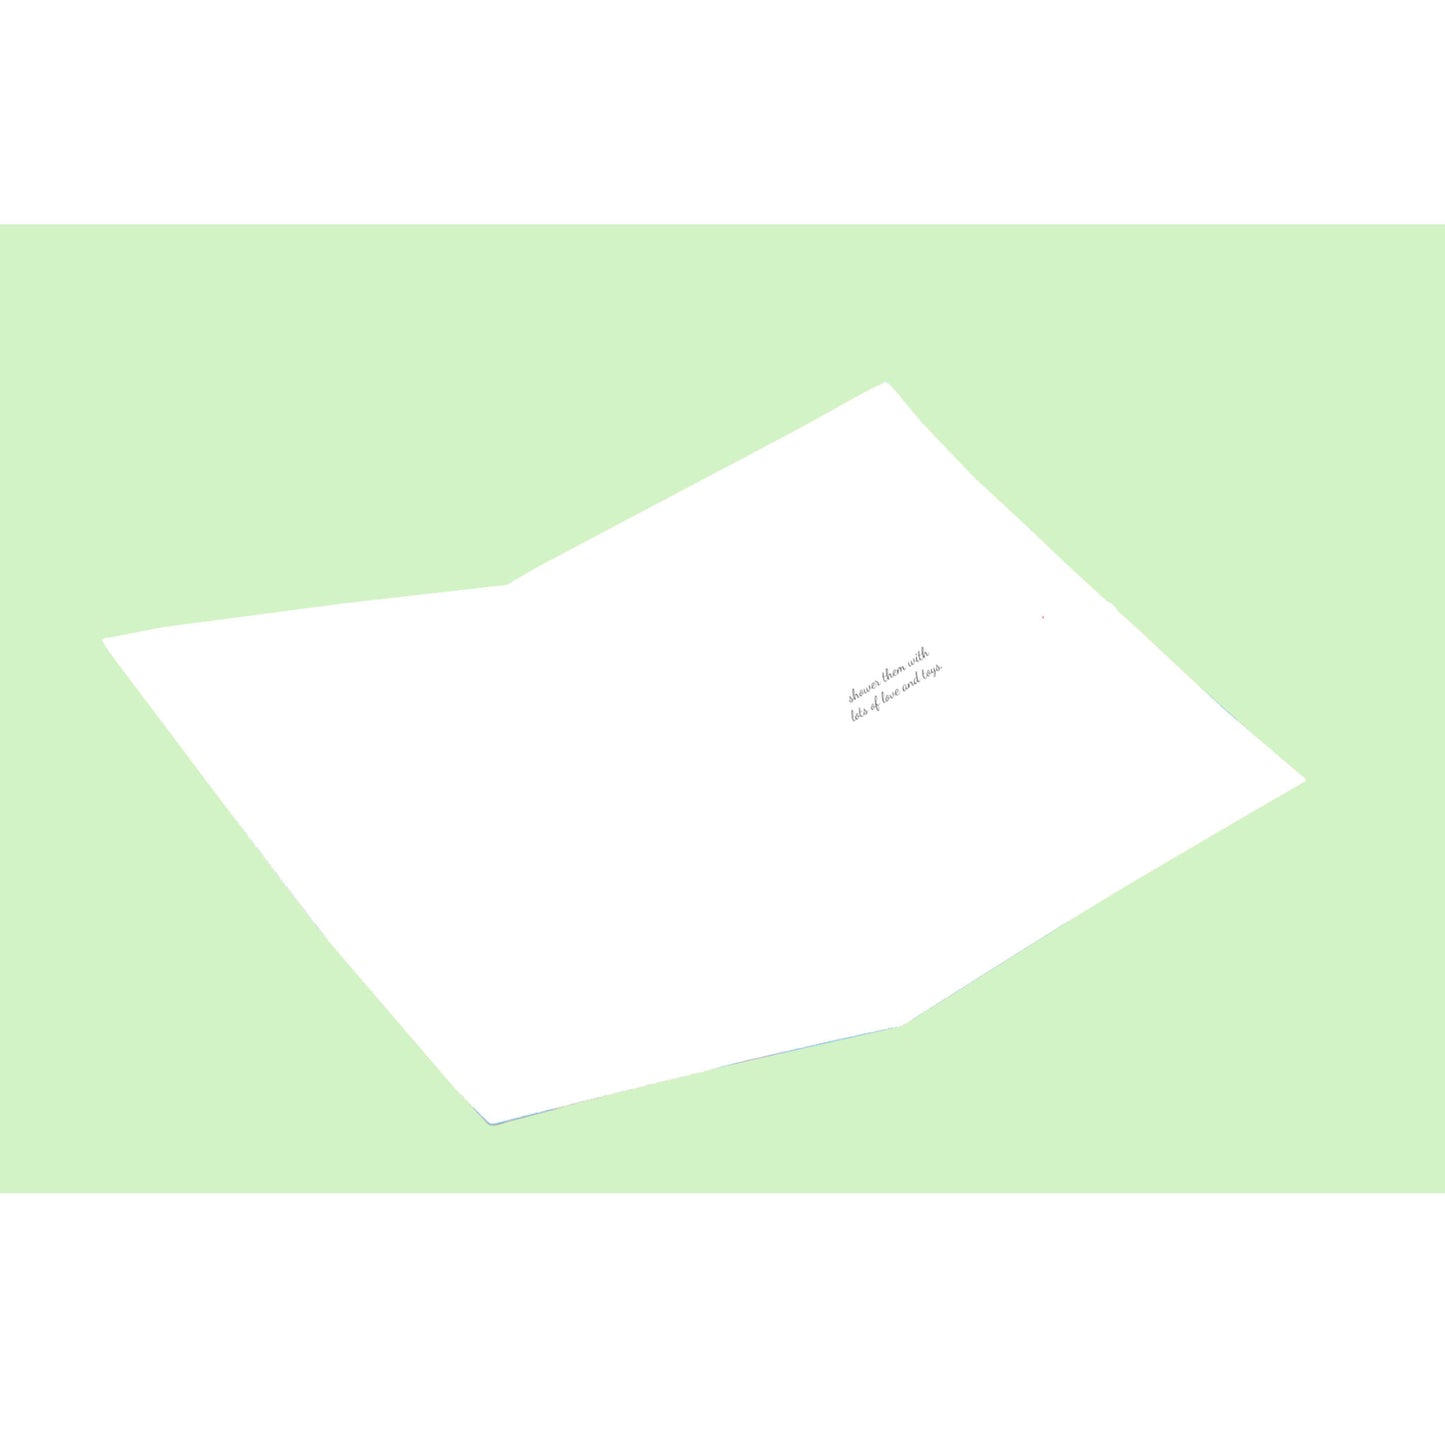 Congratulations on new 5.5x8.5 Open Greeting Card - Green